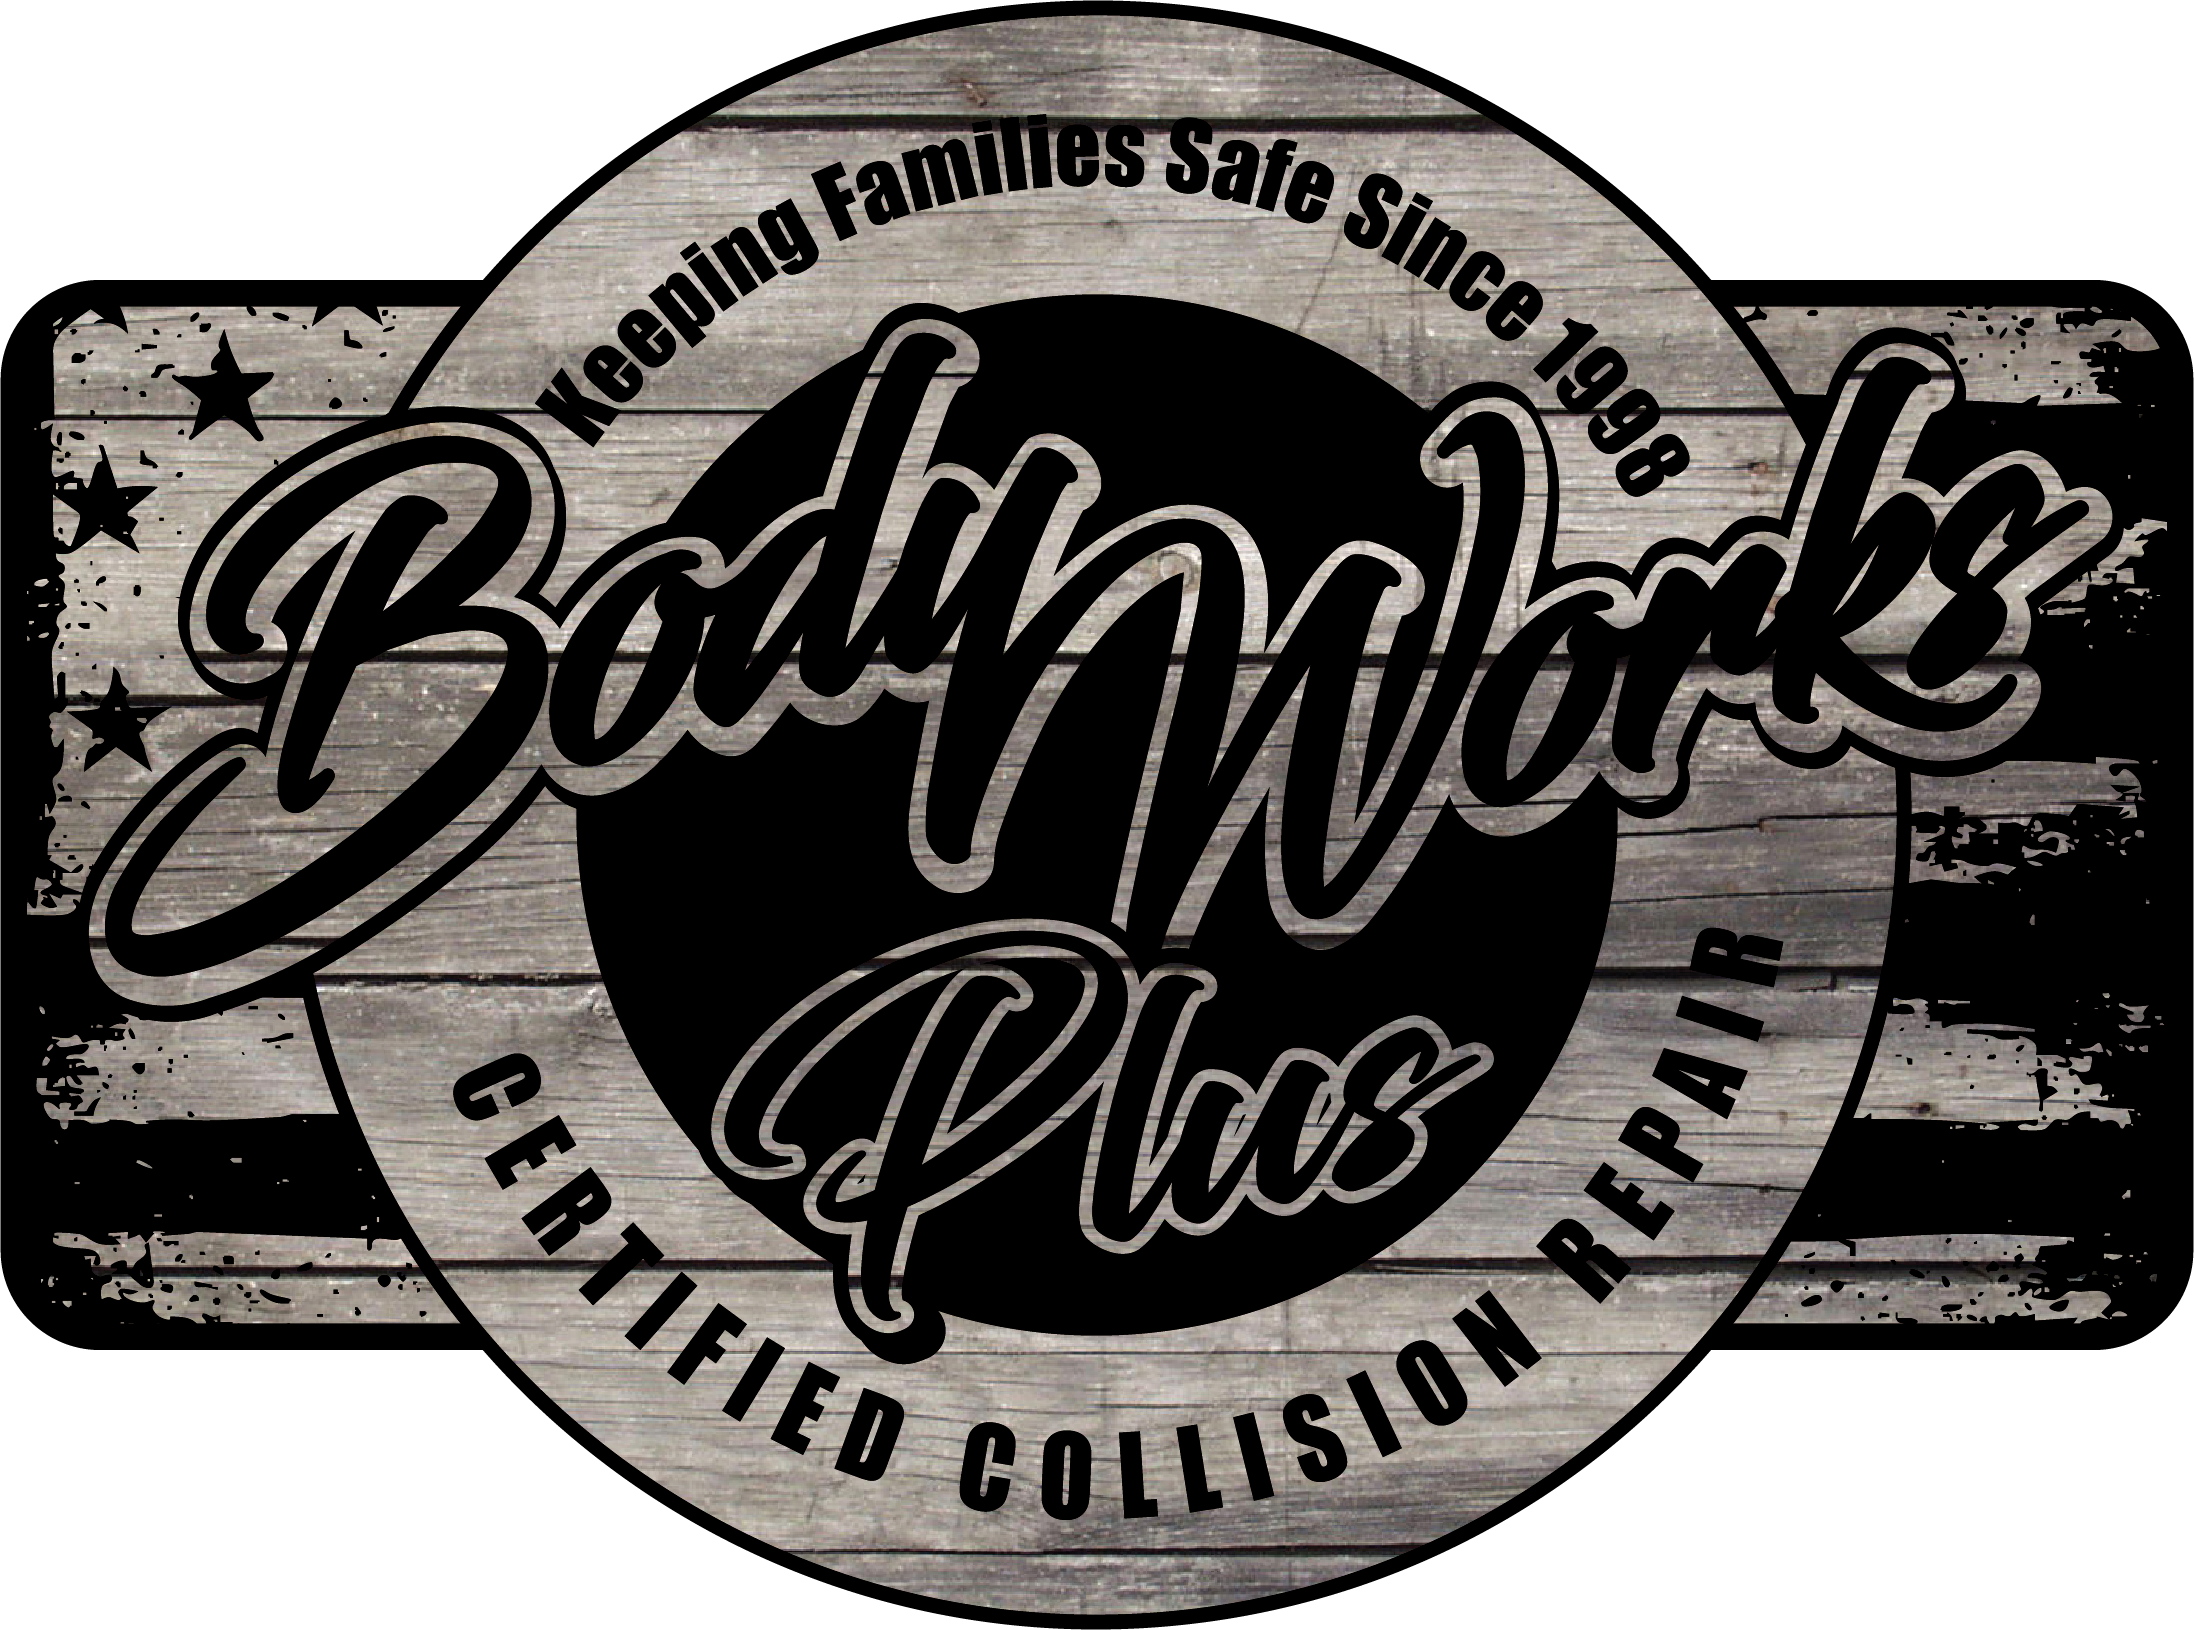 Body Works Plus Certified Collision Repair: Keeping Families Safe Since 1998